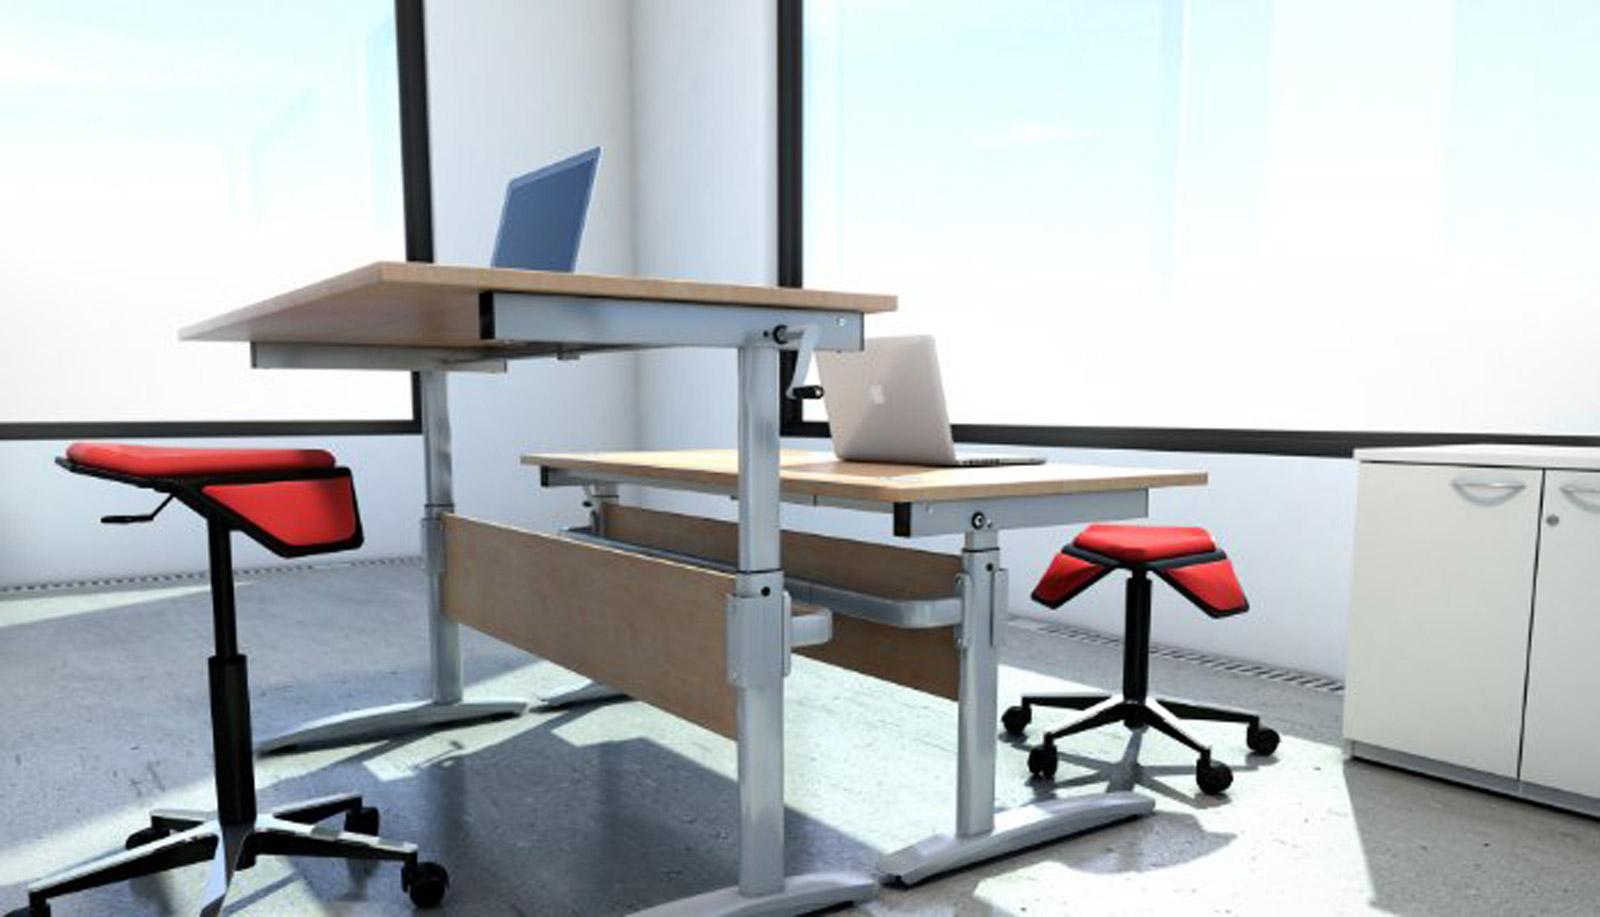 Sit and stand desks